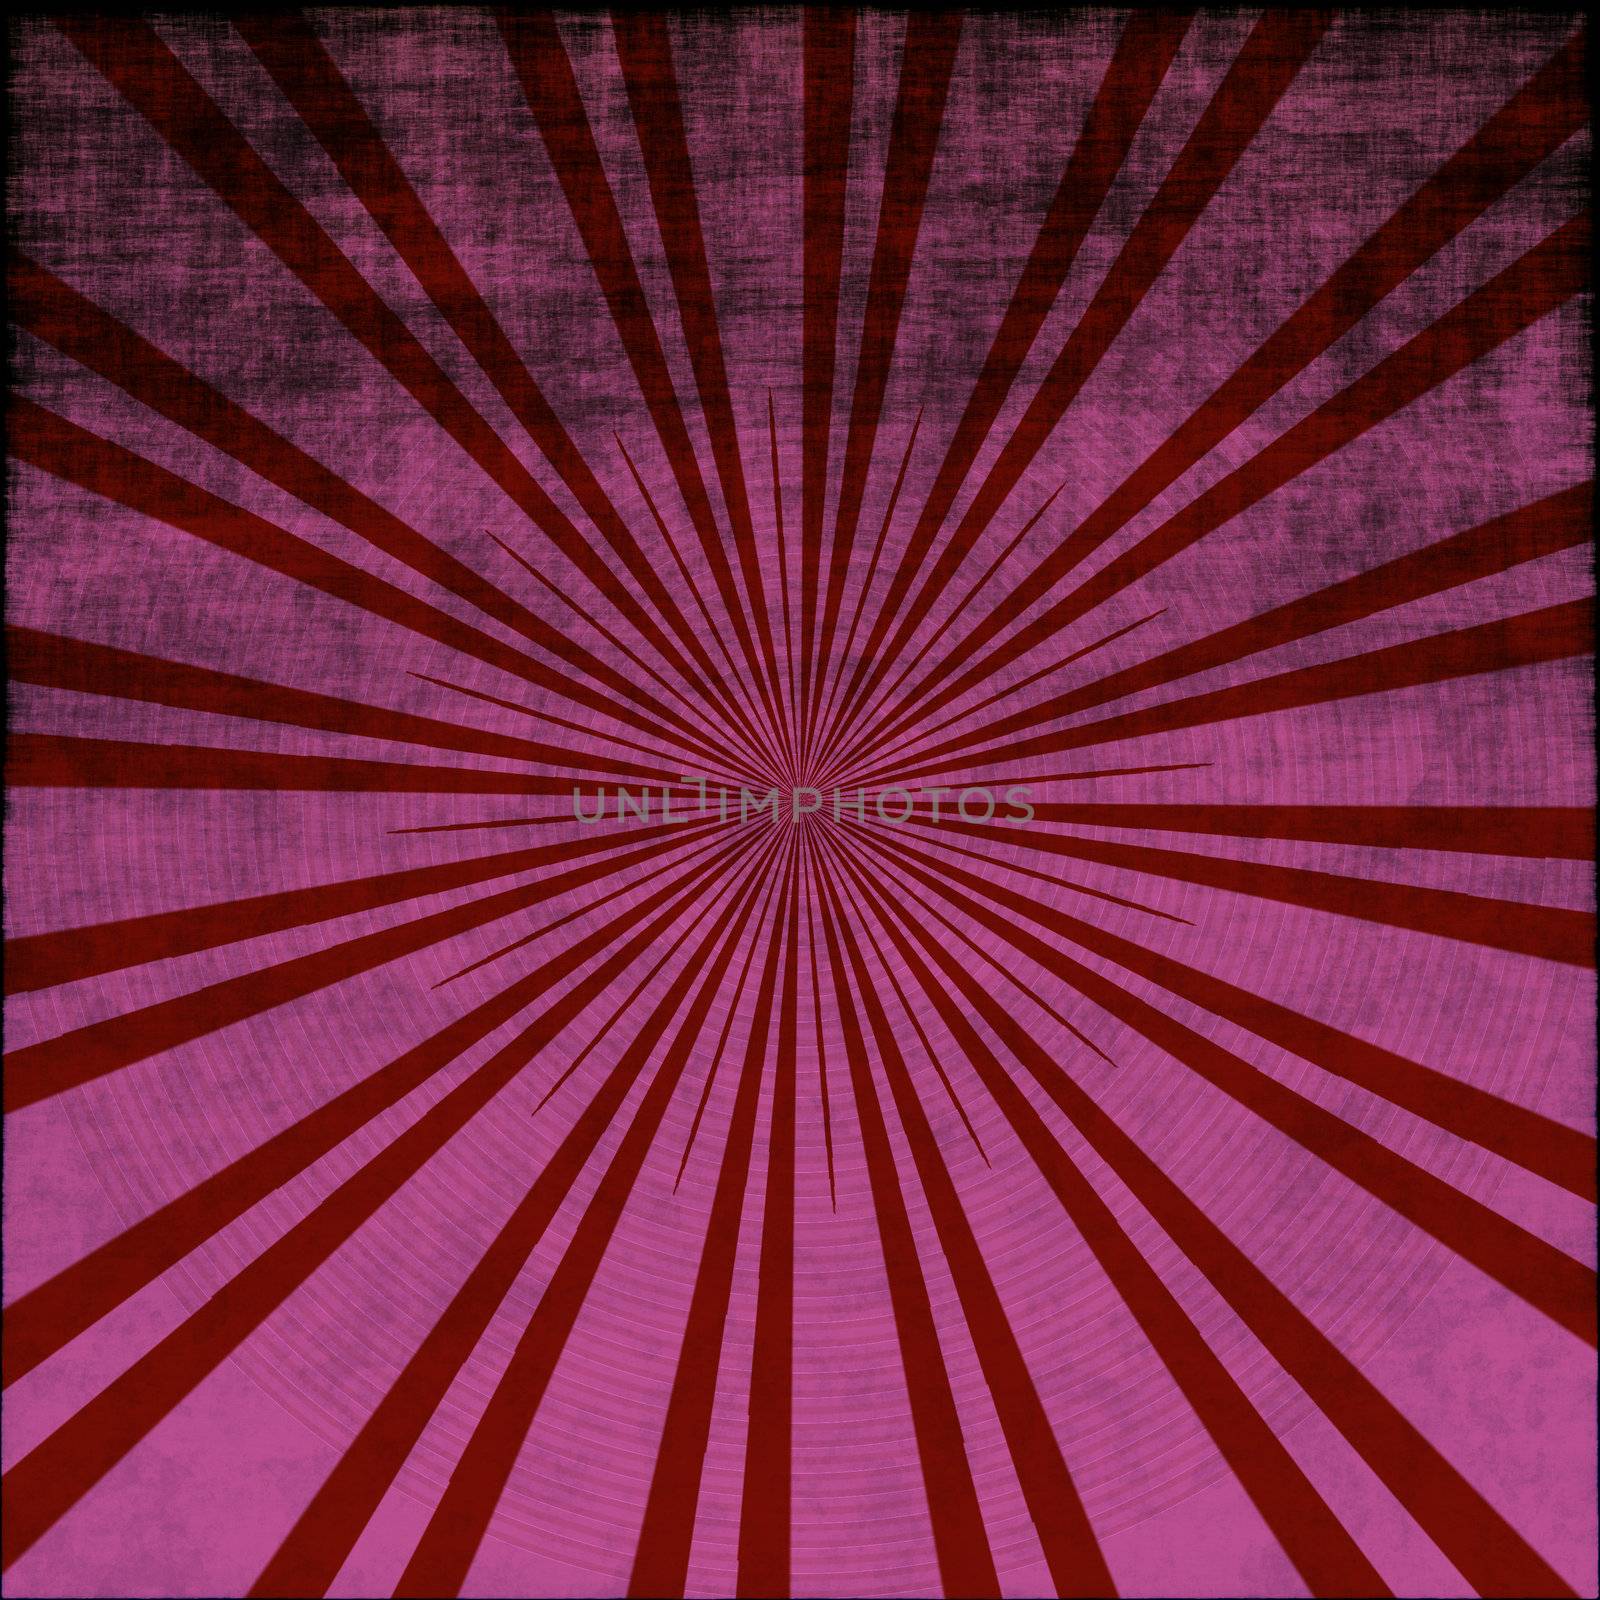 A background of grungy red starburst with radiating rays